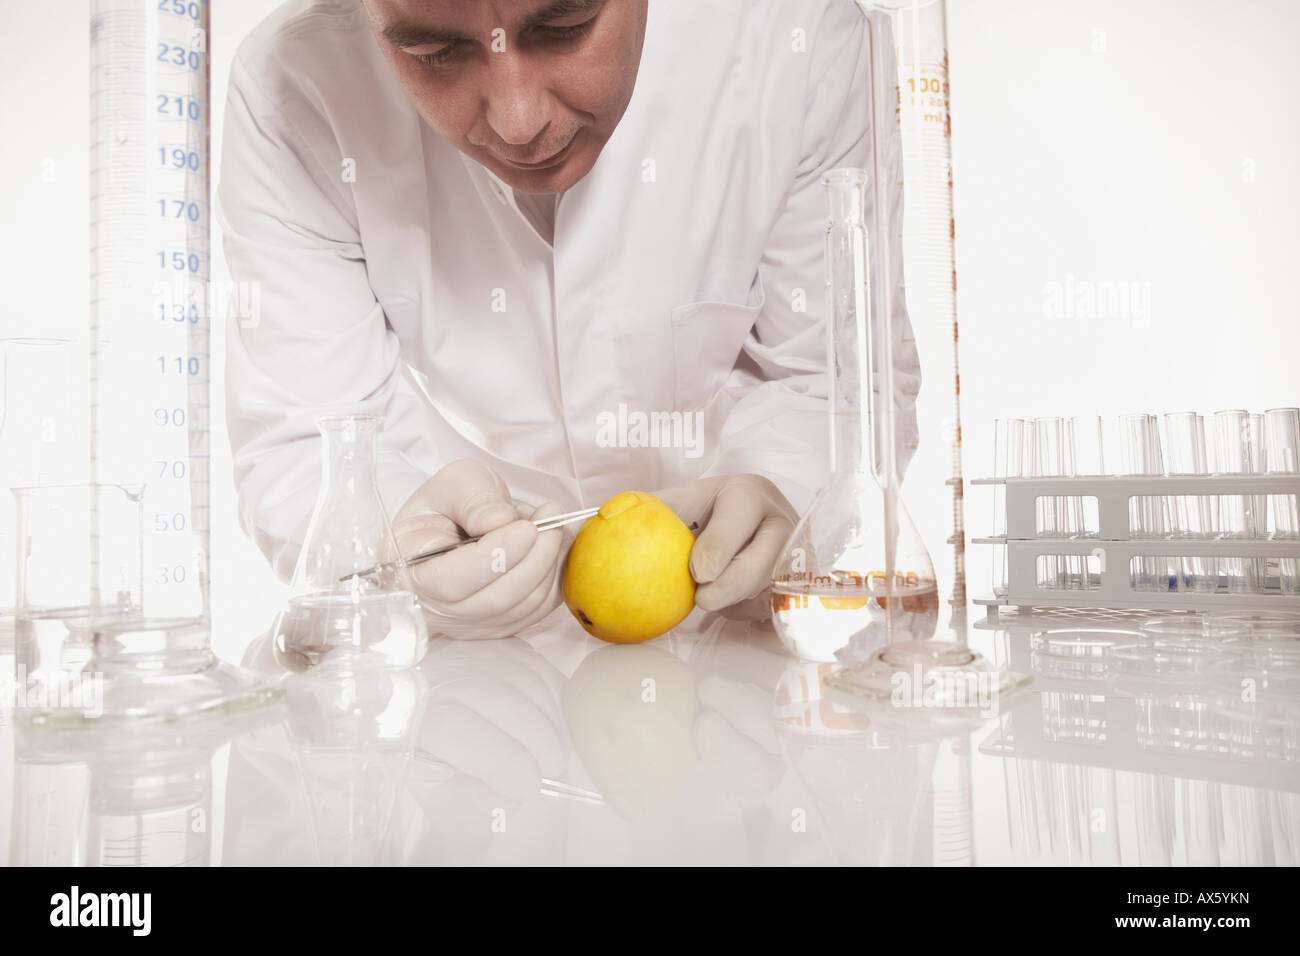 Chemist examining a genetically modified apple Stock Photo